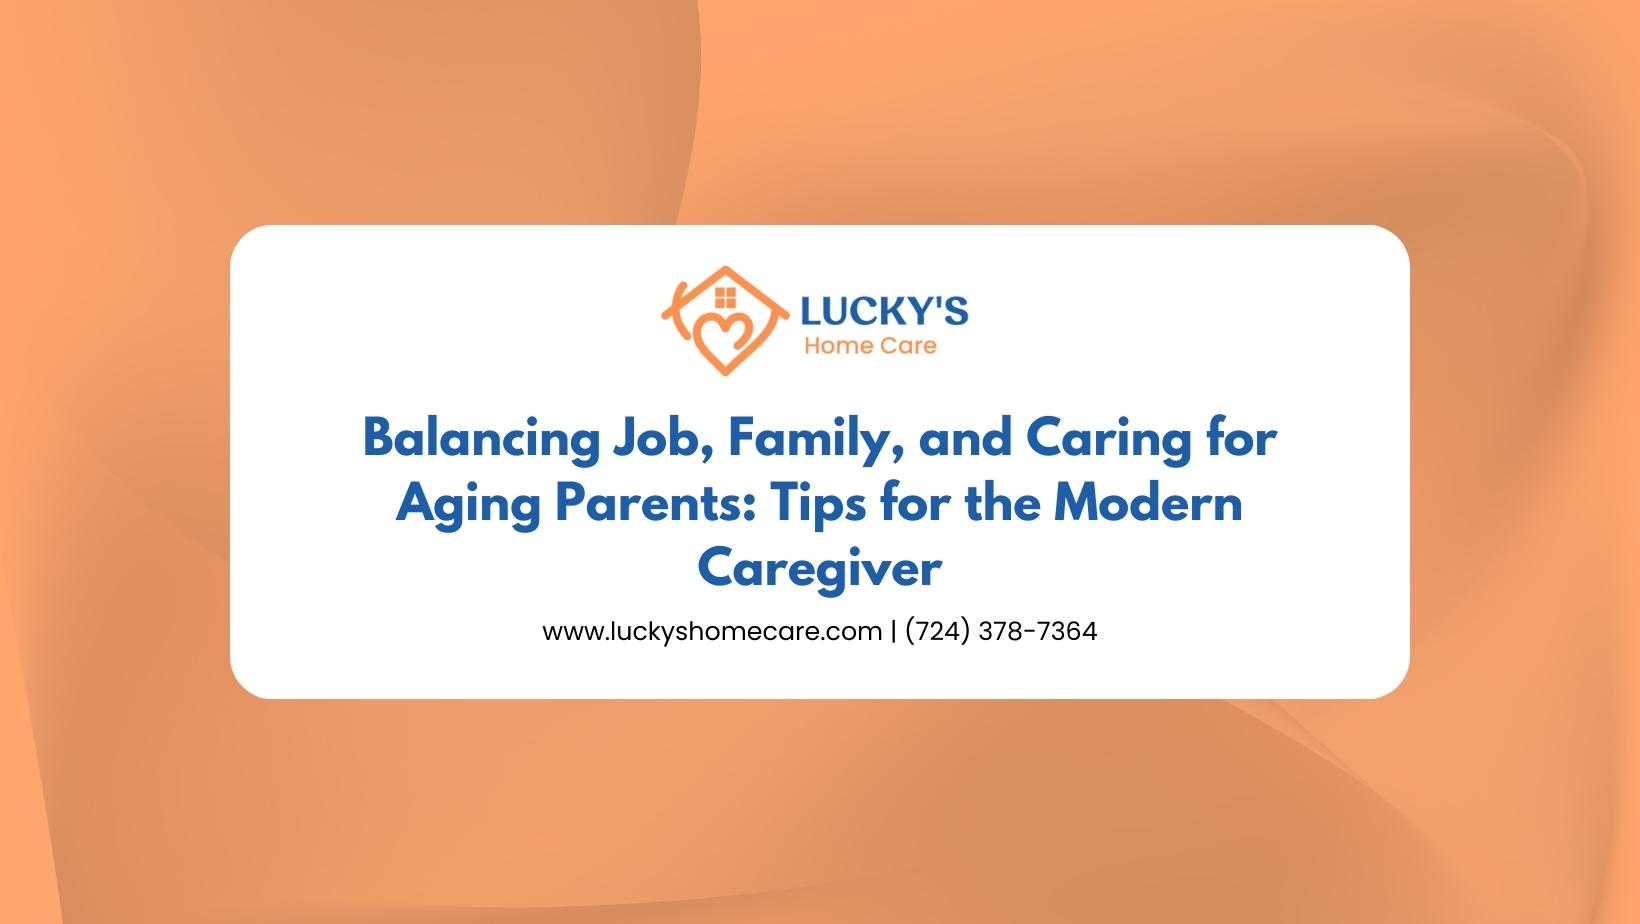 Balancing Job, Family, and Caring for Aging Parents- Tips for the Modern Caregiver